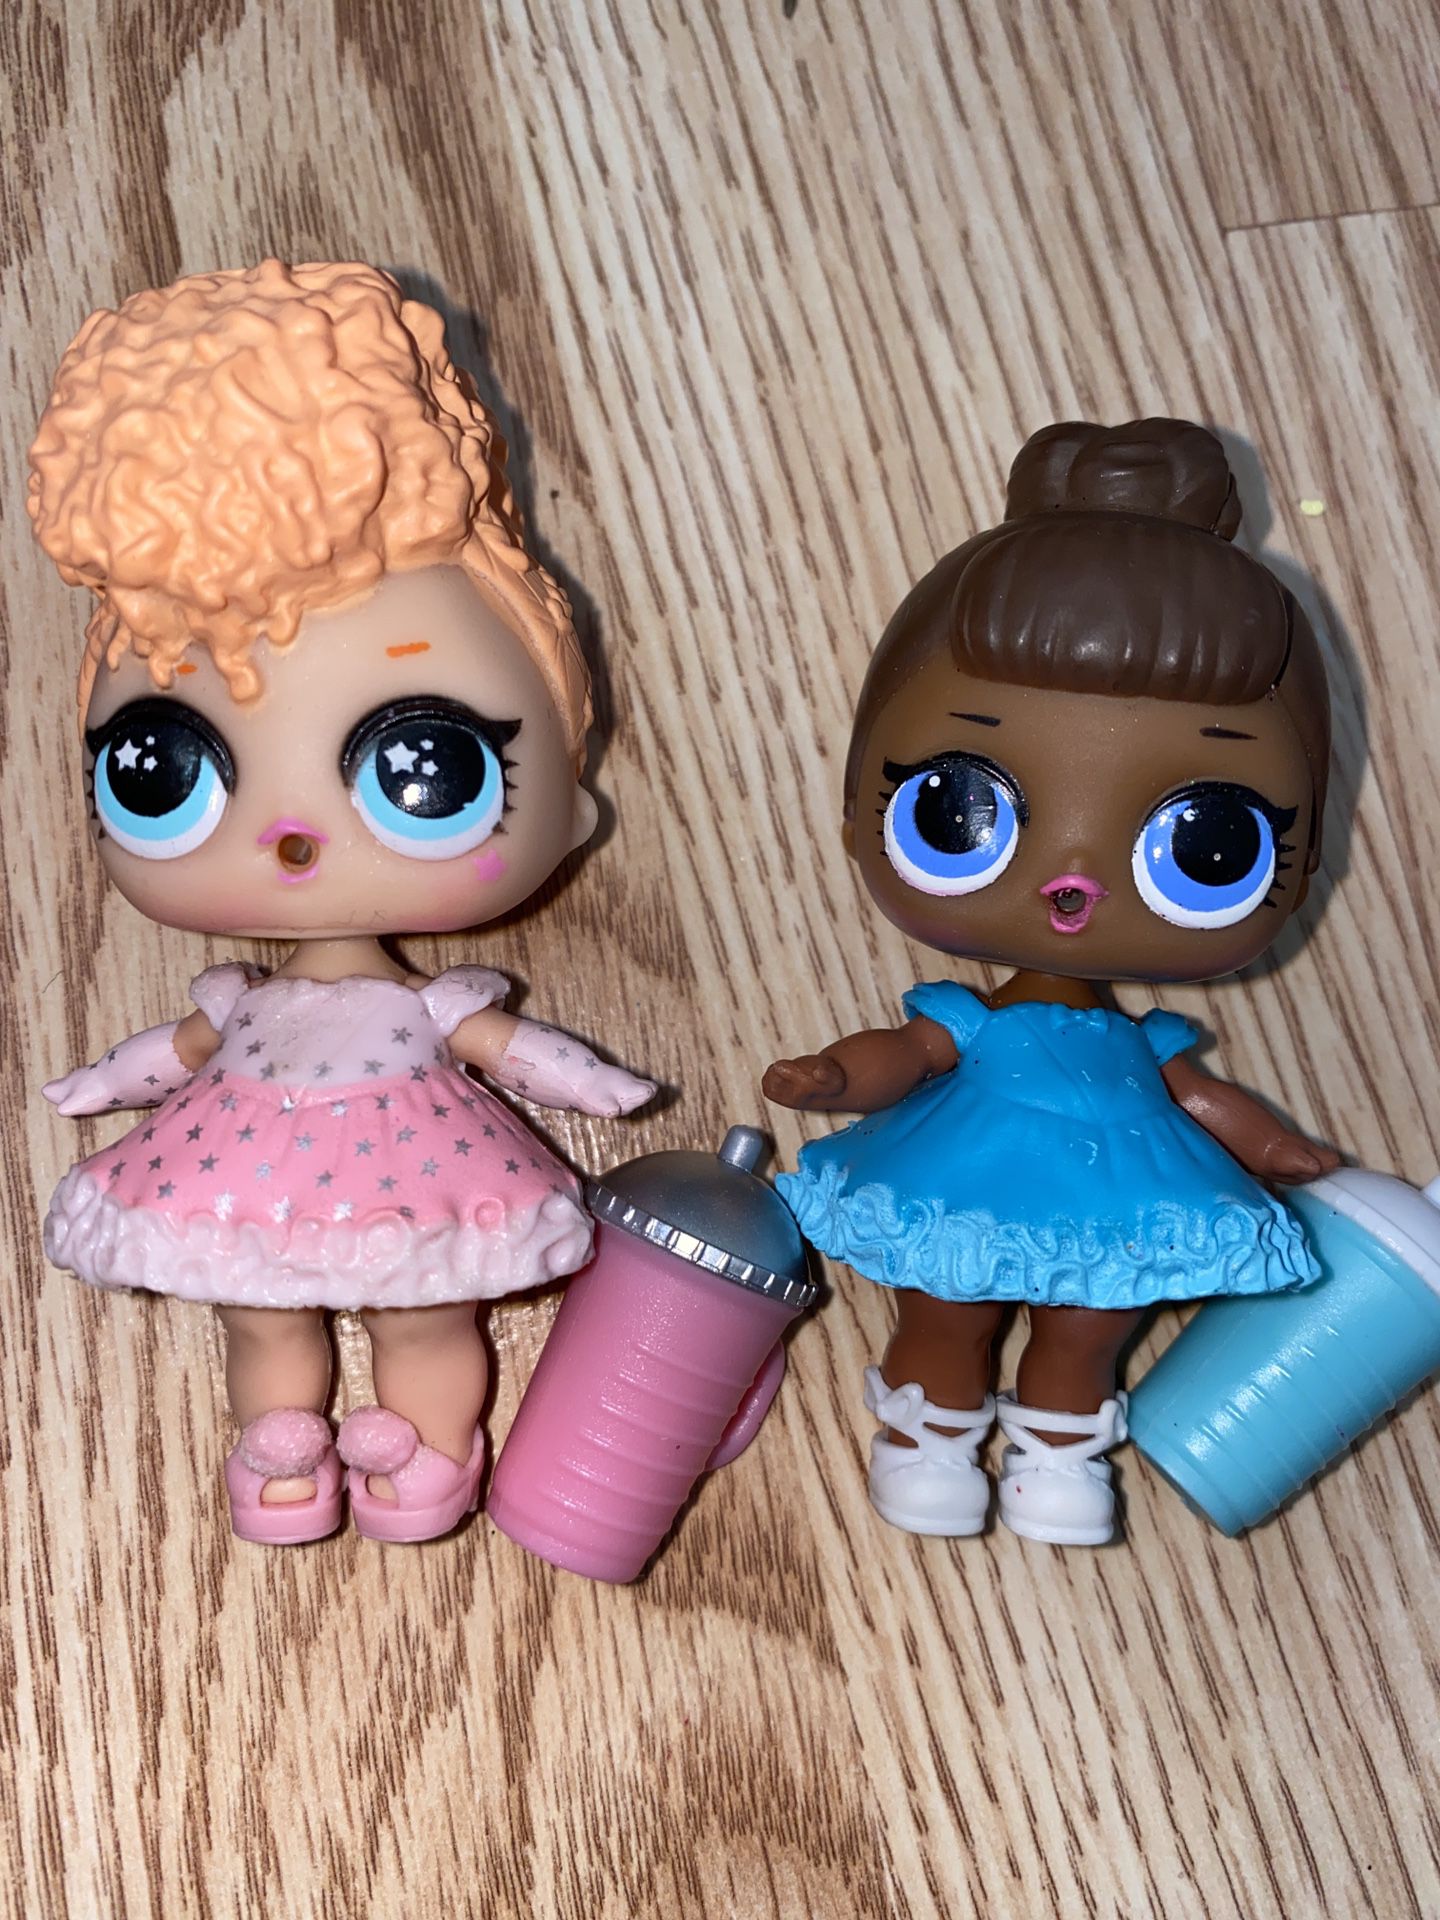 Lol Dolls “goodie and miss baby”